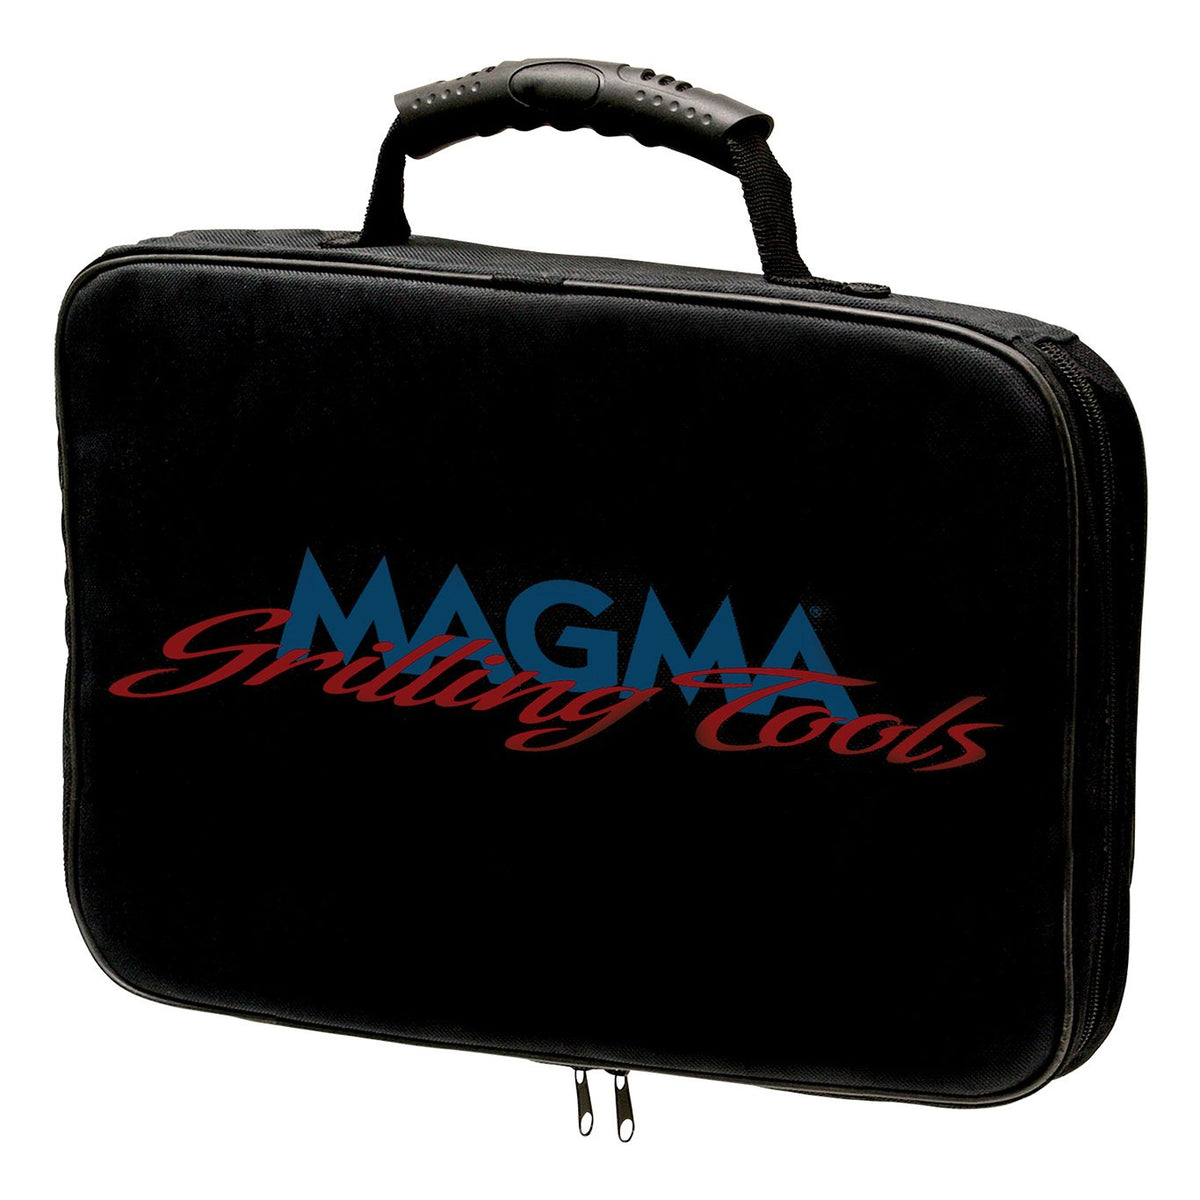 Magma A10-364 Padded Carrying Storage Case Bag for Nesting Cookware, Black